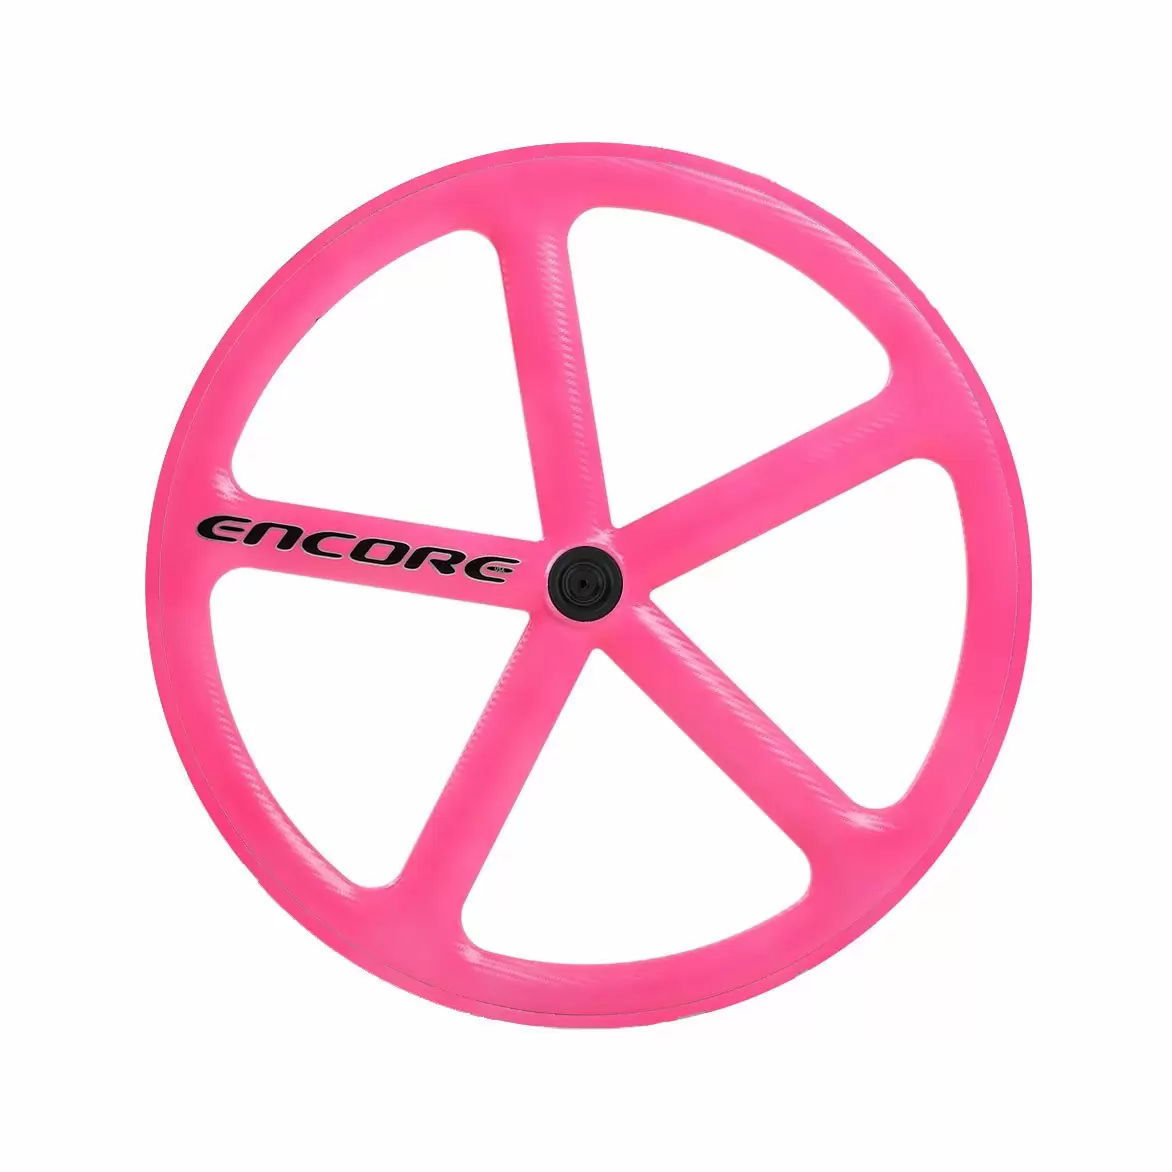 roue arrière 700c track 5 rayons carbone tissage rose fluo nmsw - image